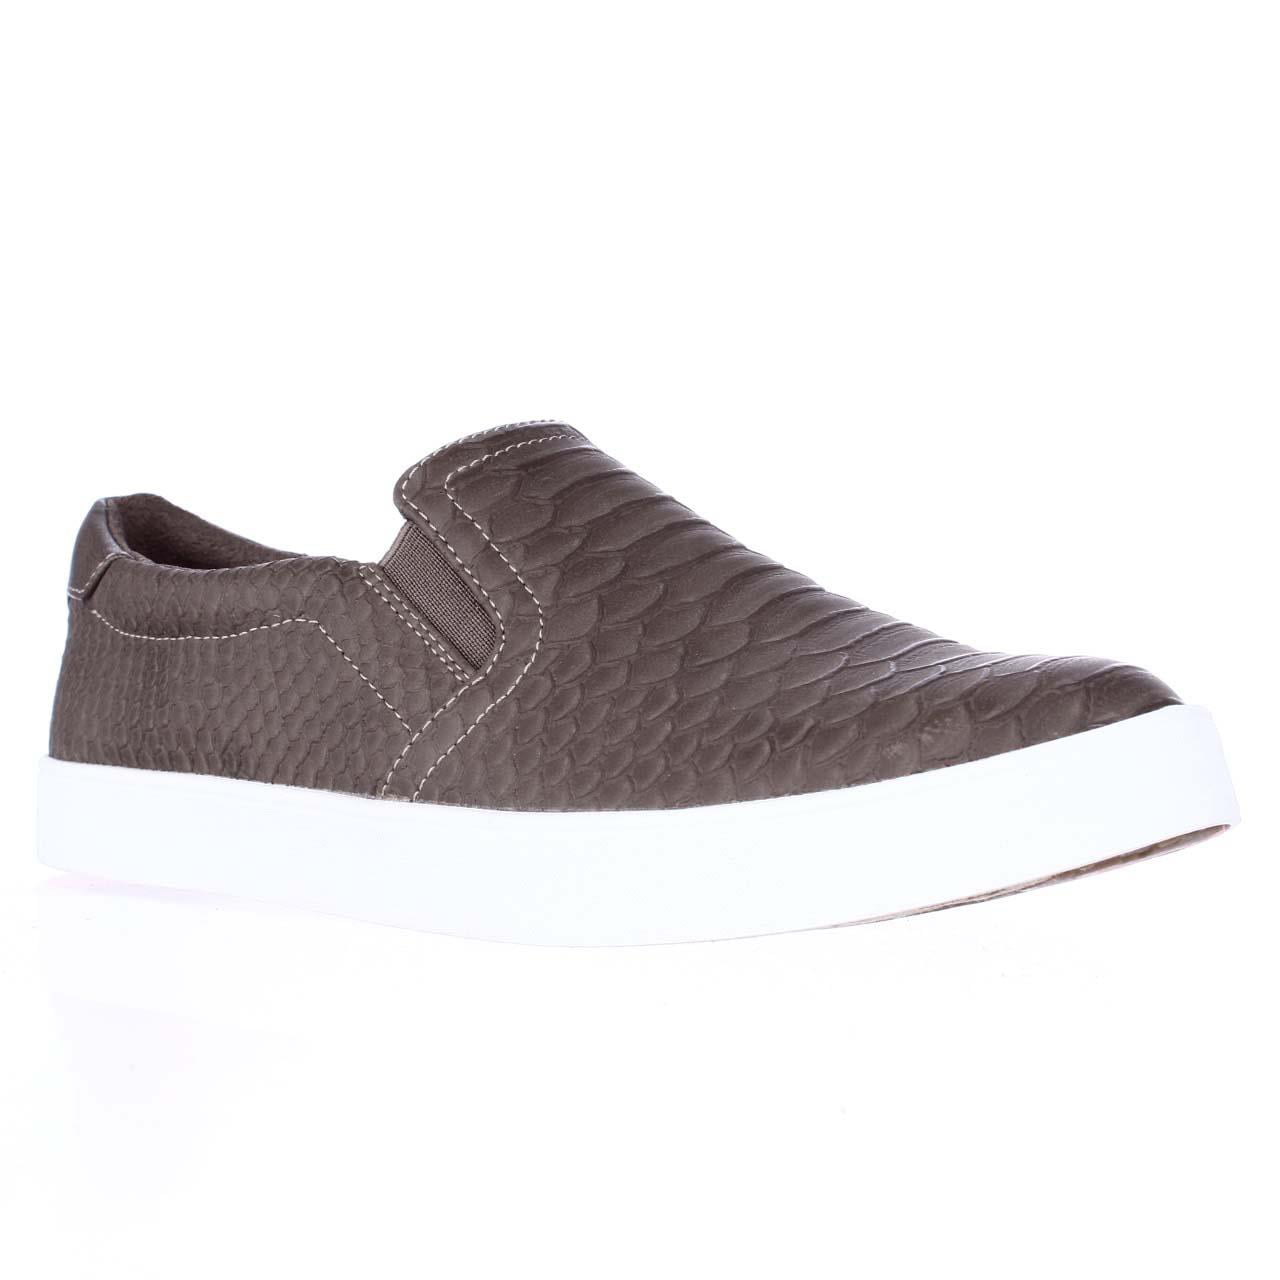 Women's Dr. Scholl's Madison Slip On Laceless Fashion Sneakers ...